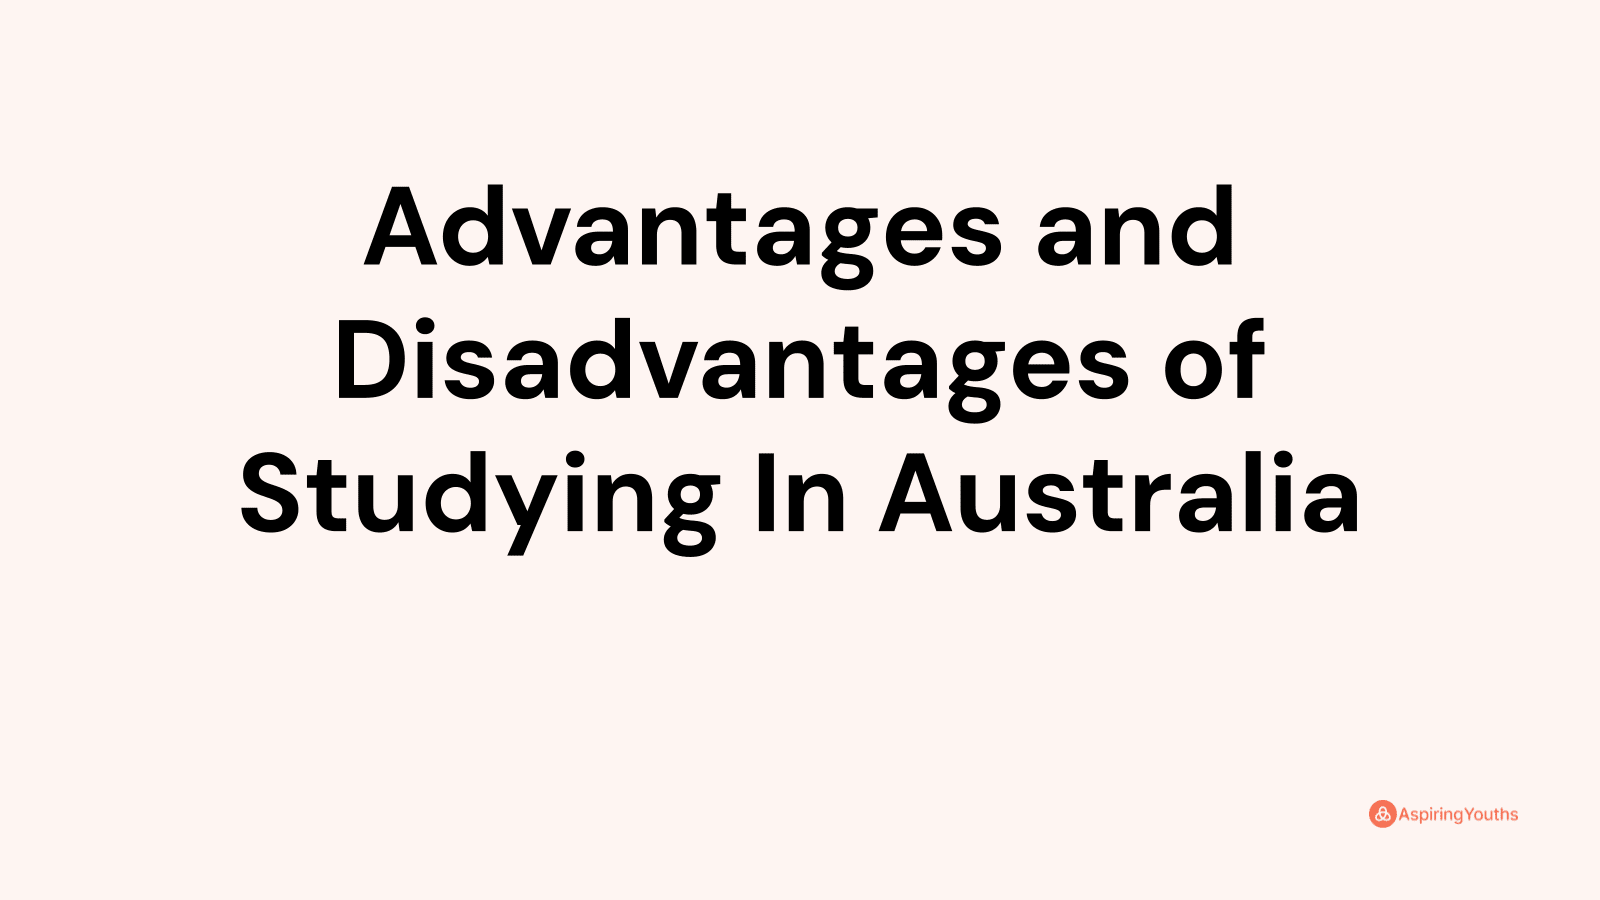 Advantages and disadvantages of Studying In Australia